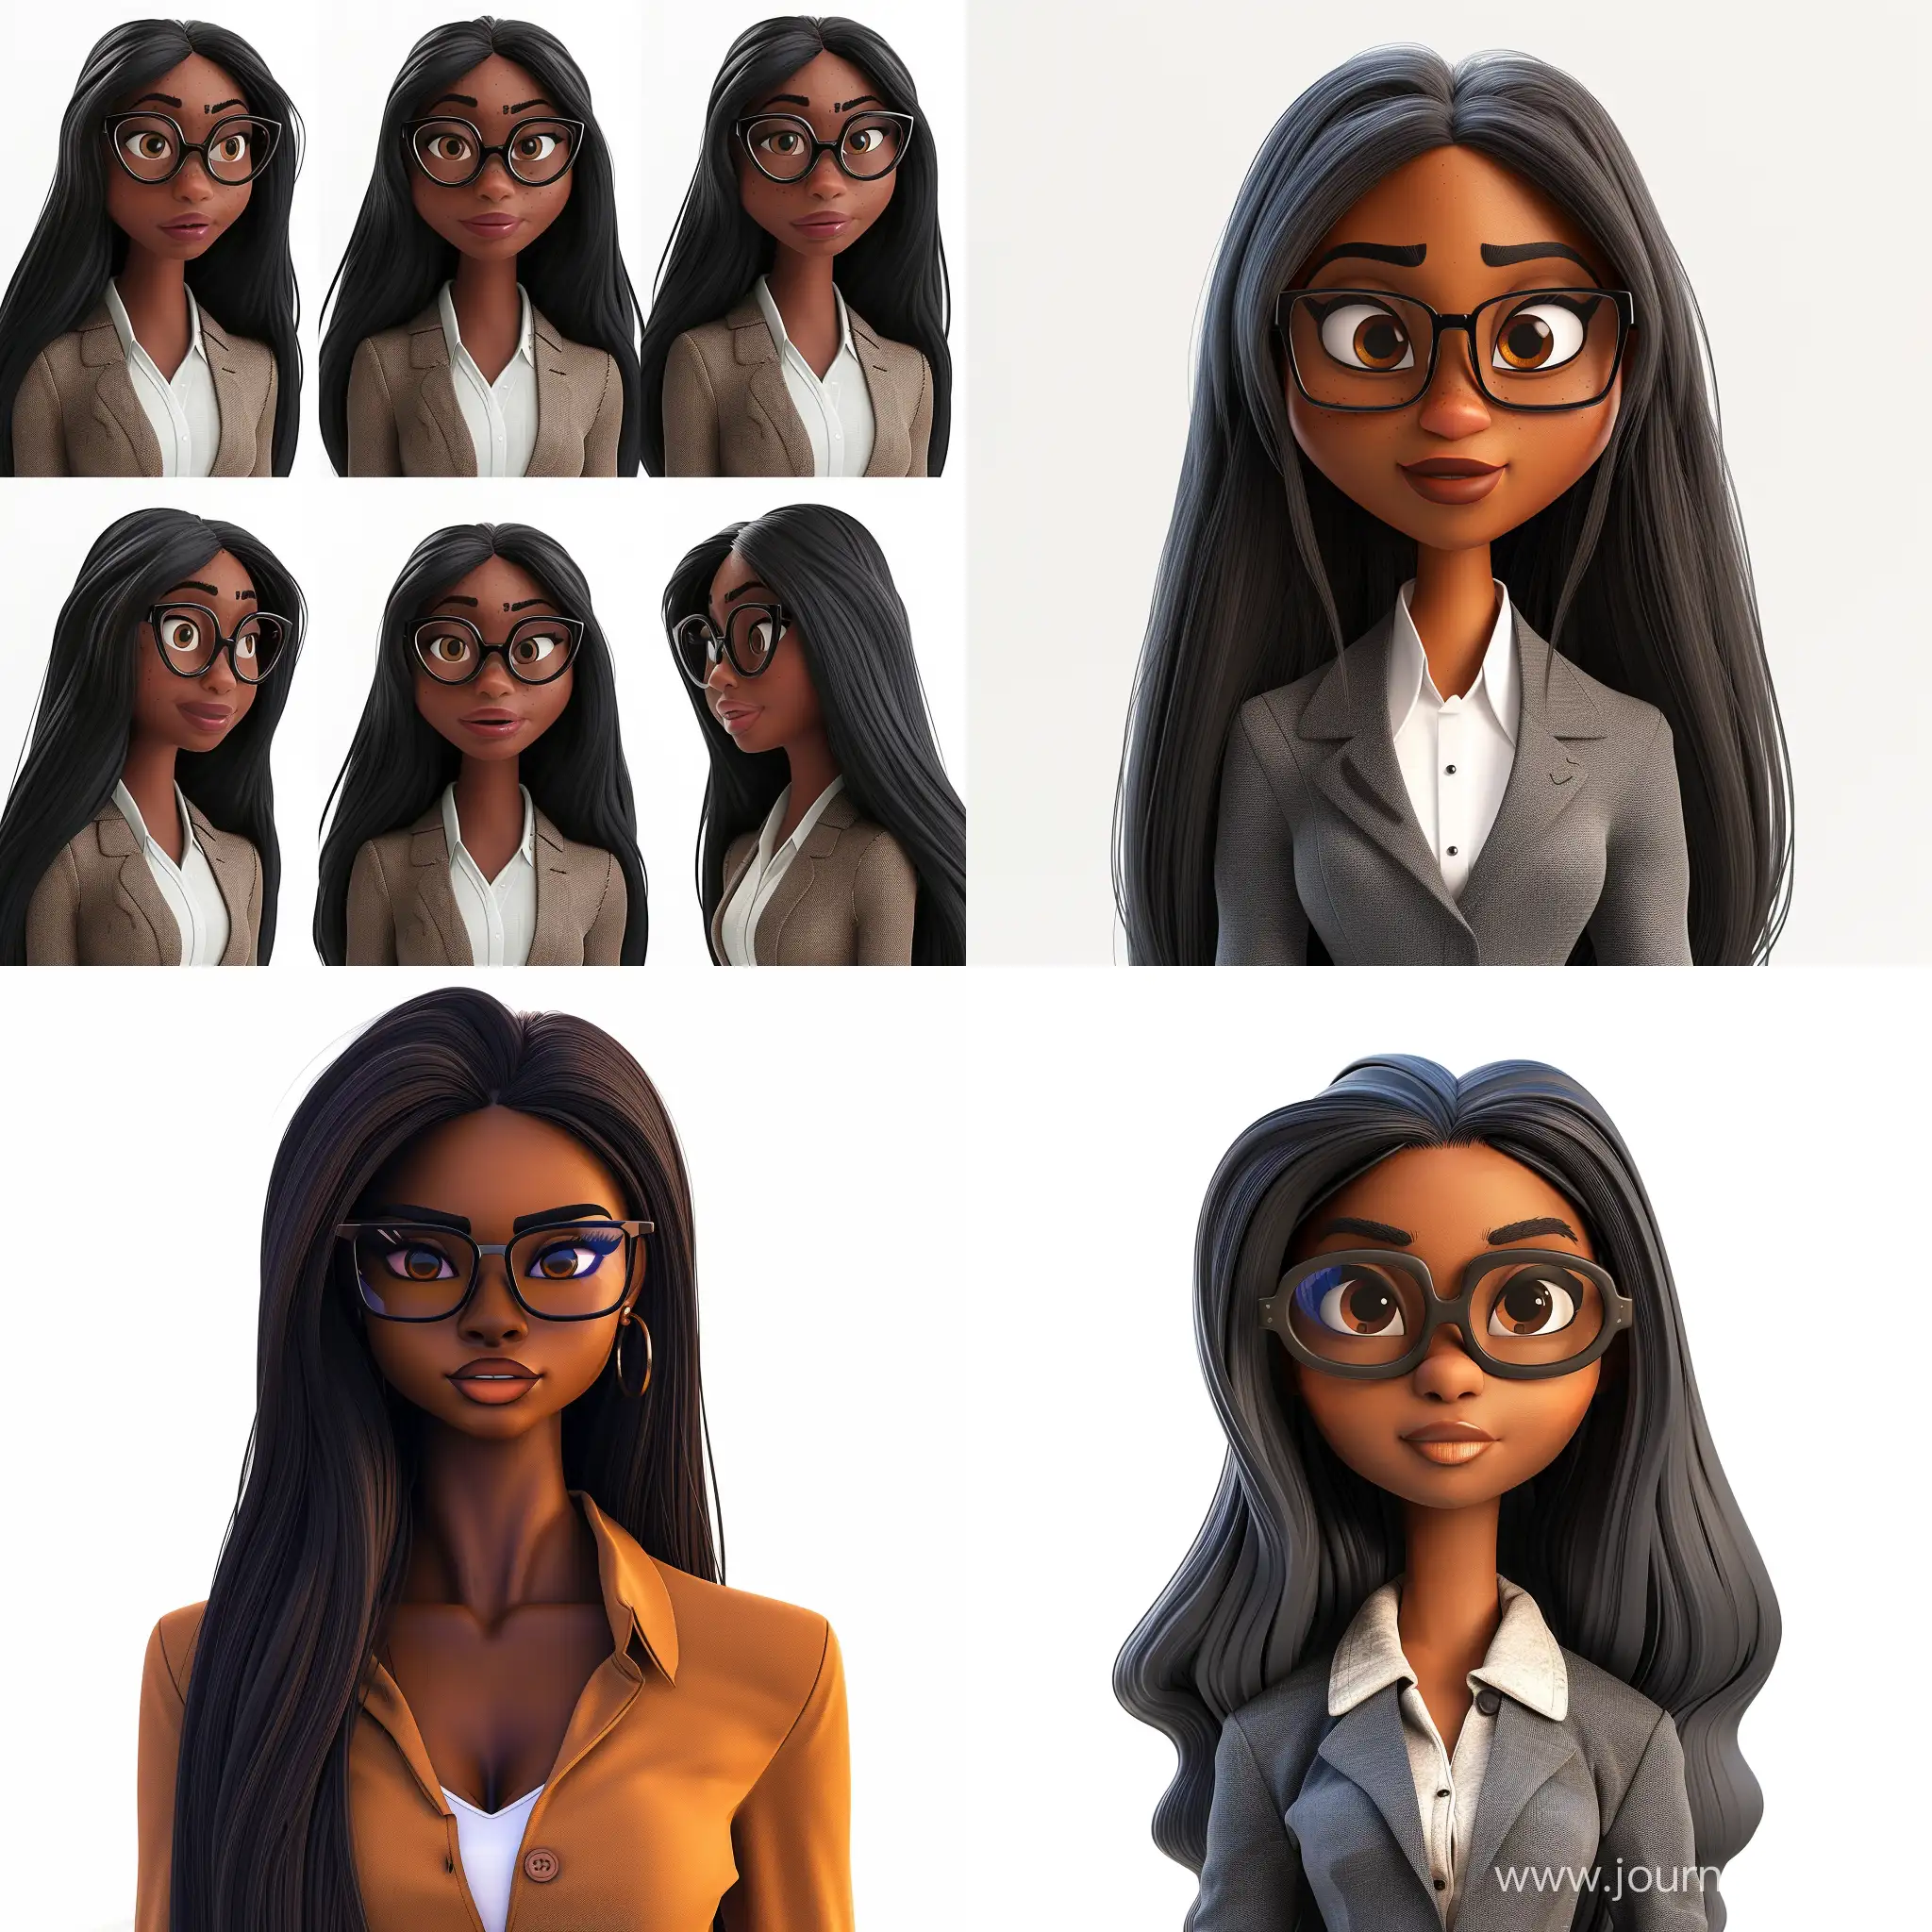 Generate a lifelike animation portraying a Black woman with striking long hair, adorned with framed glasses and professional clothing. The character should be depicted facing the camera, showcasing various facial expressions. The animation should be presented on a white background, ensuring realism and attention to detail. Aspect ratio 16:9